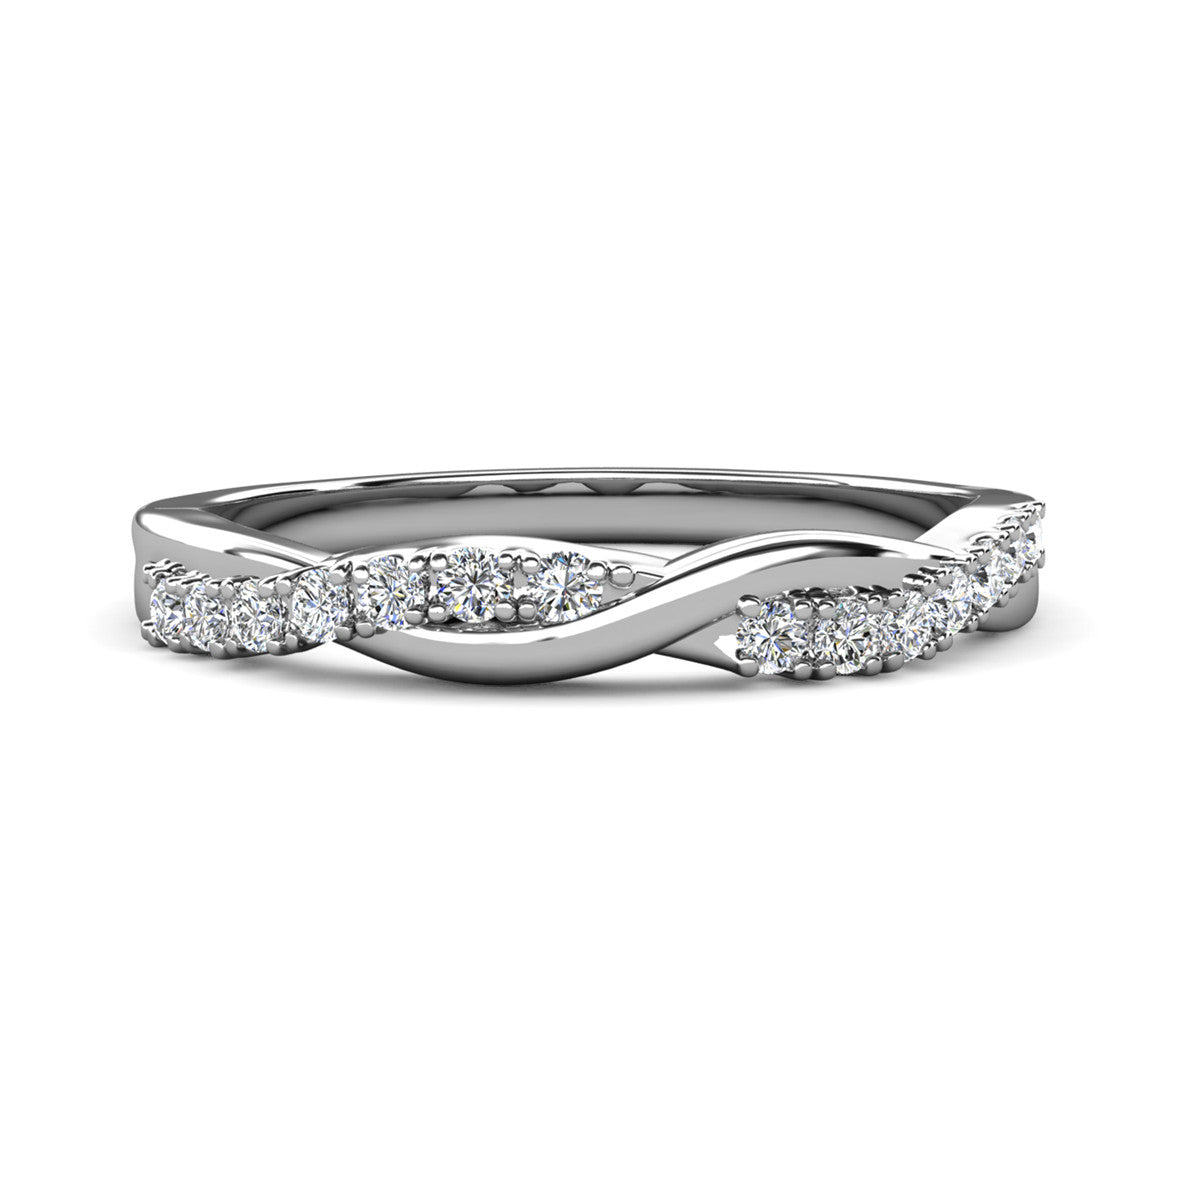 Moissanite by Cate & Chloe Avery Sterling Silver Ring with Moissanite and 5A Cubic Zirconia Crystals